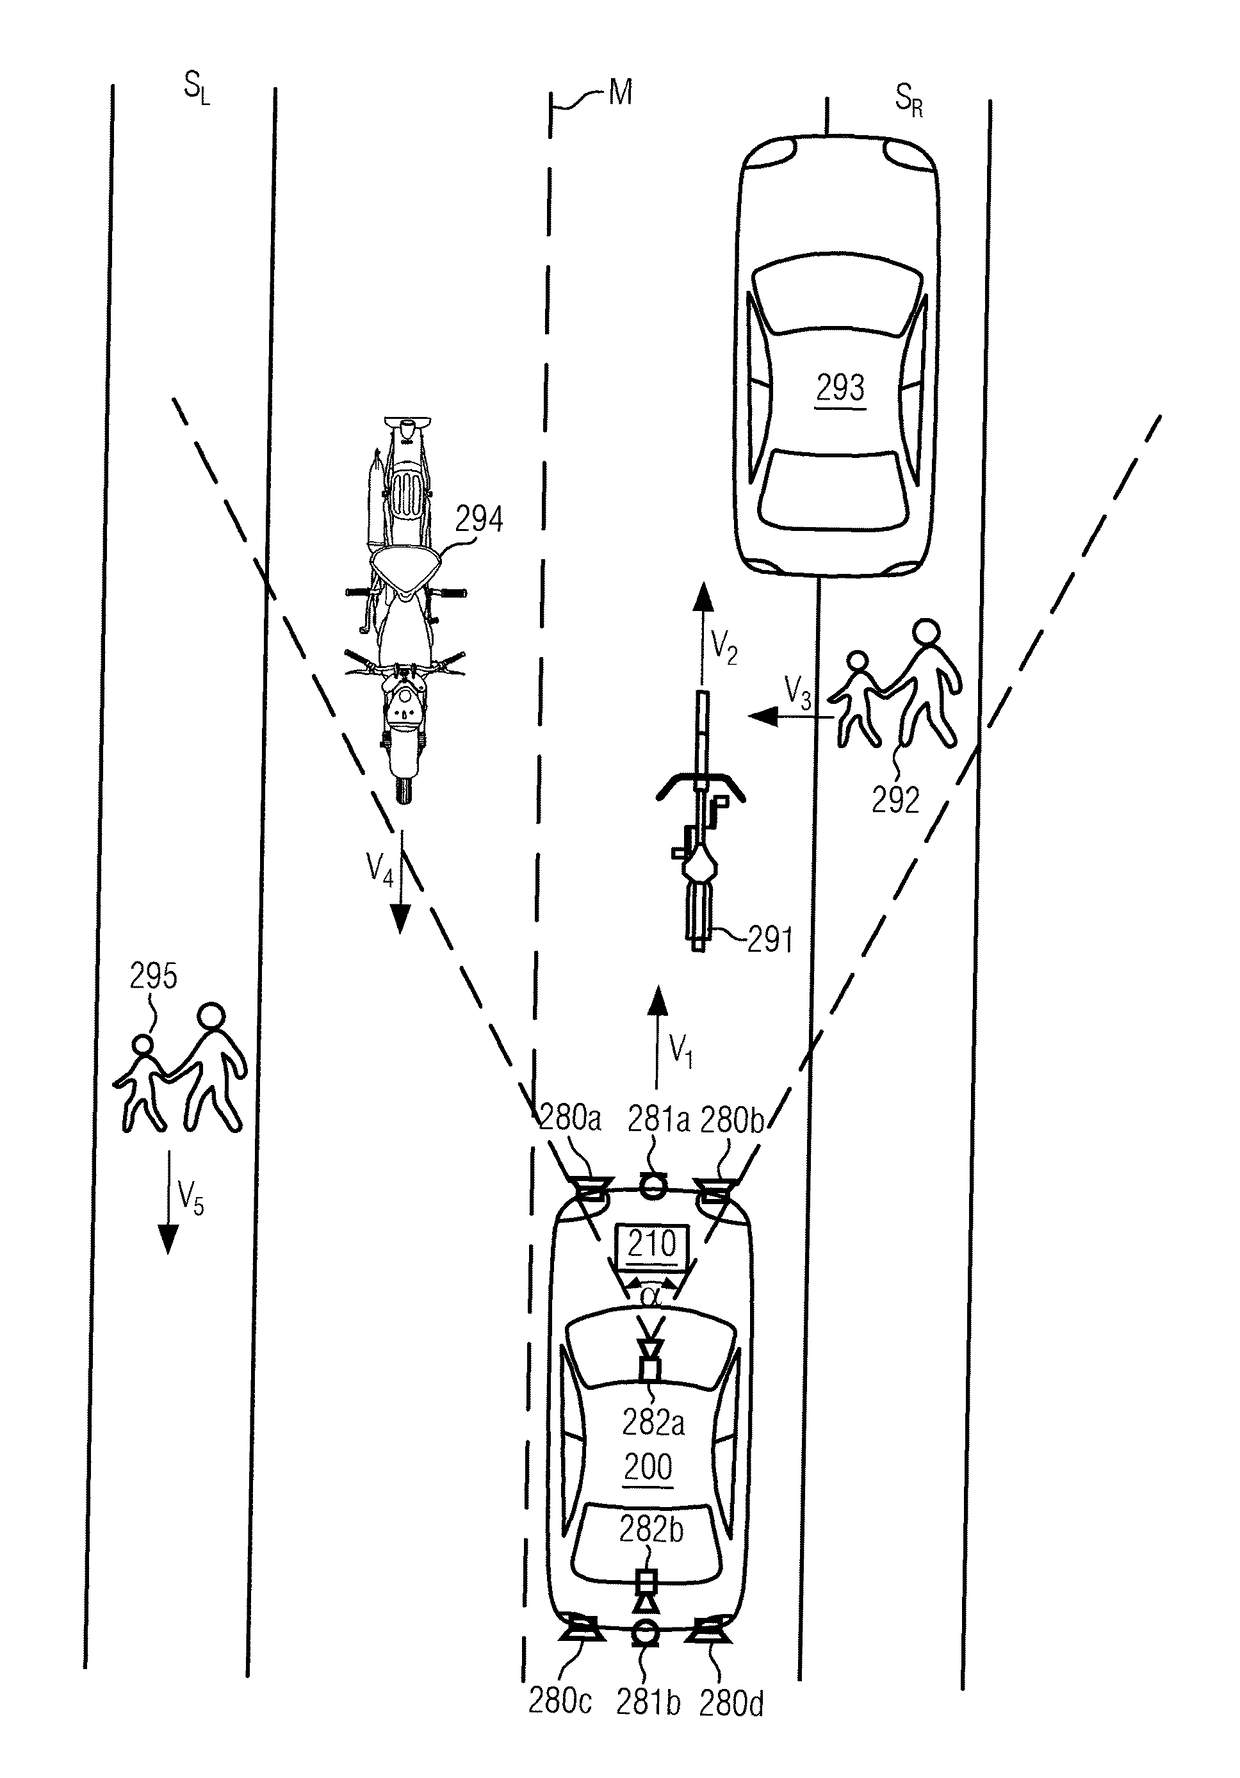 System and method for external sound synthesis of a vehicle